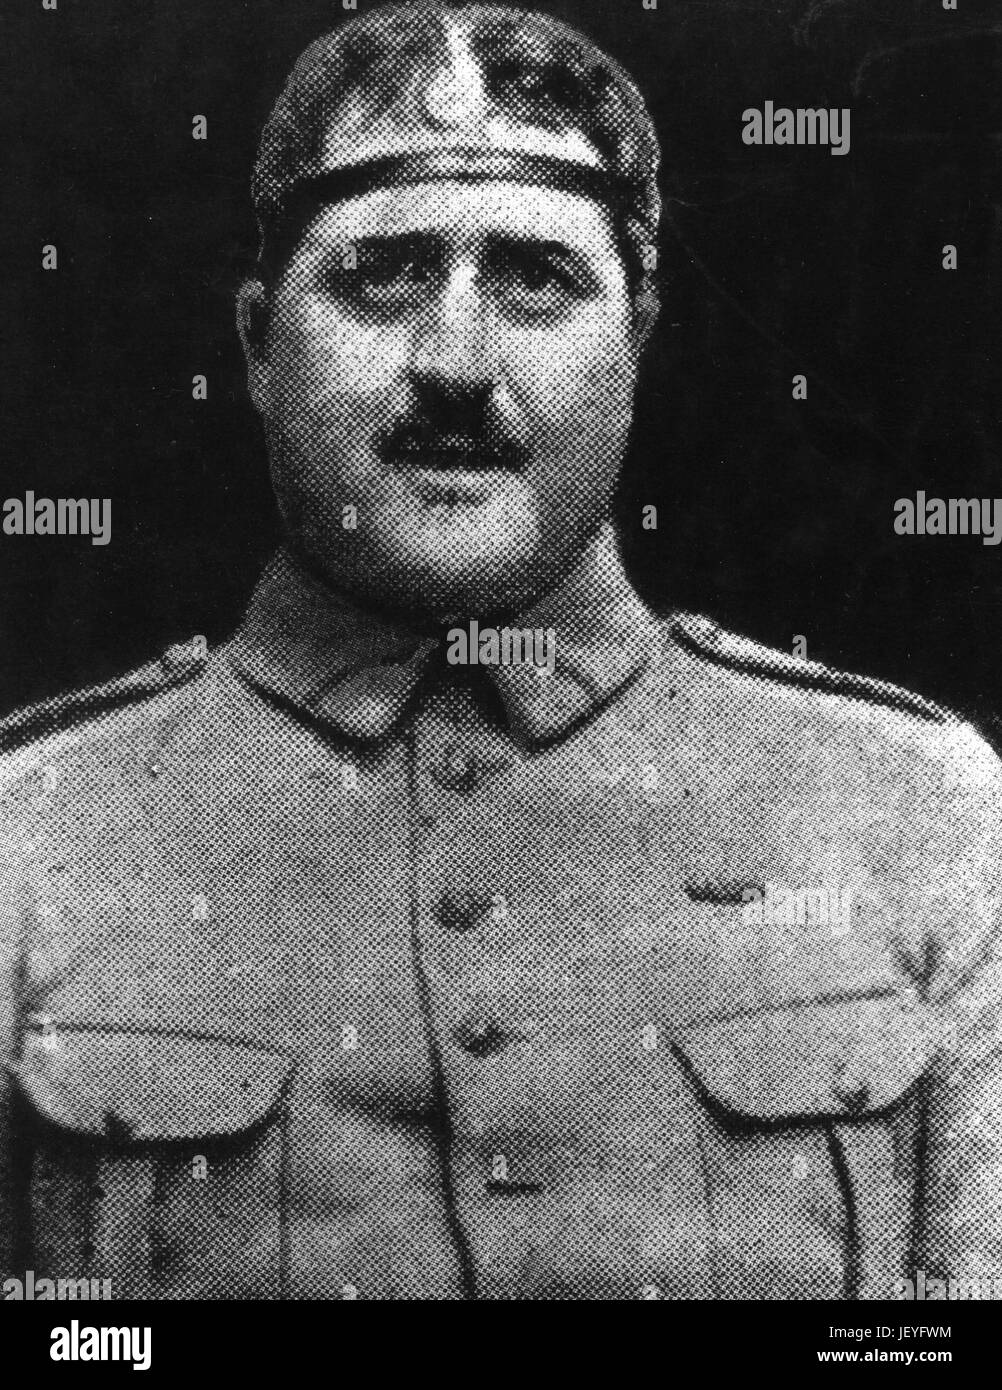 Guillaume Apollinaire photo #519, Guillaume Apollinaire image